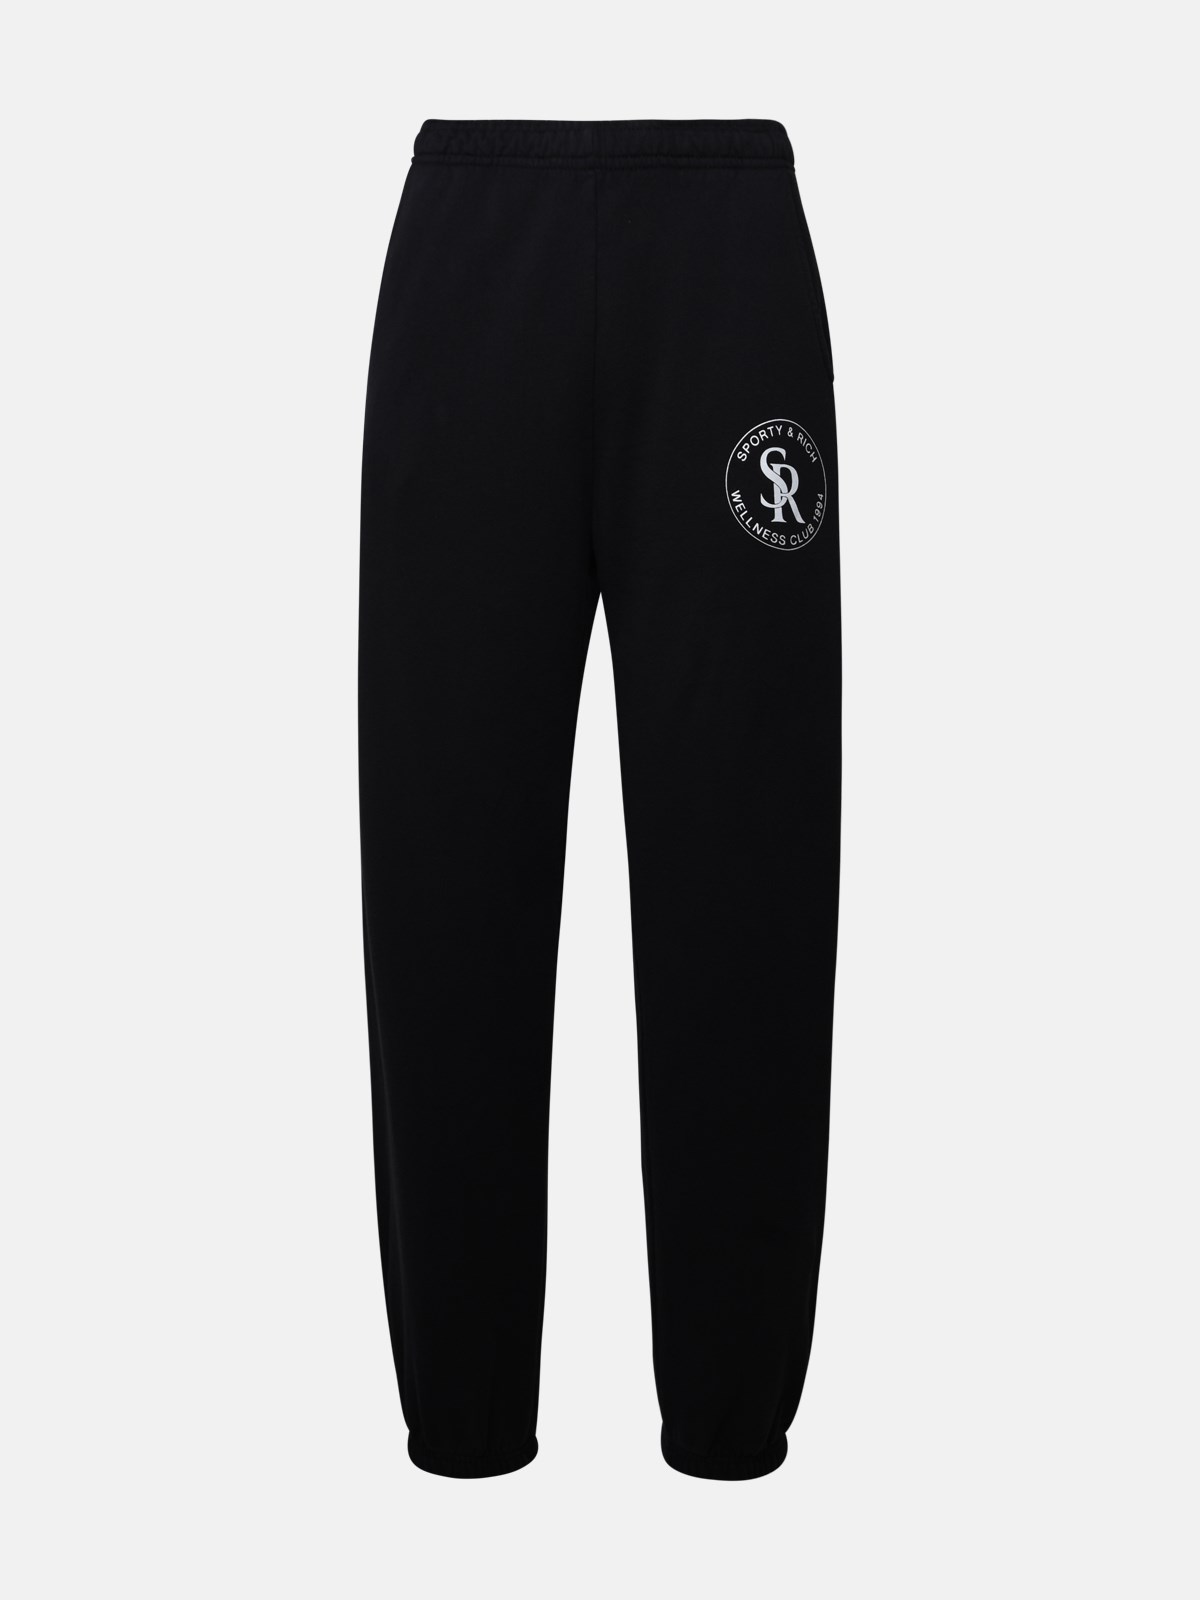 Sporty And Rich Euro Cootne Pants In Black